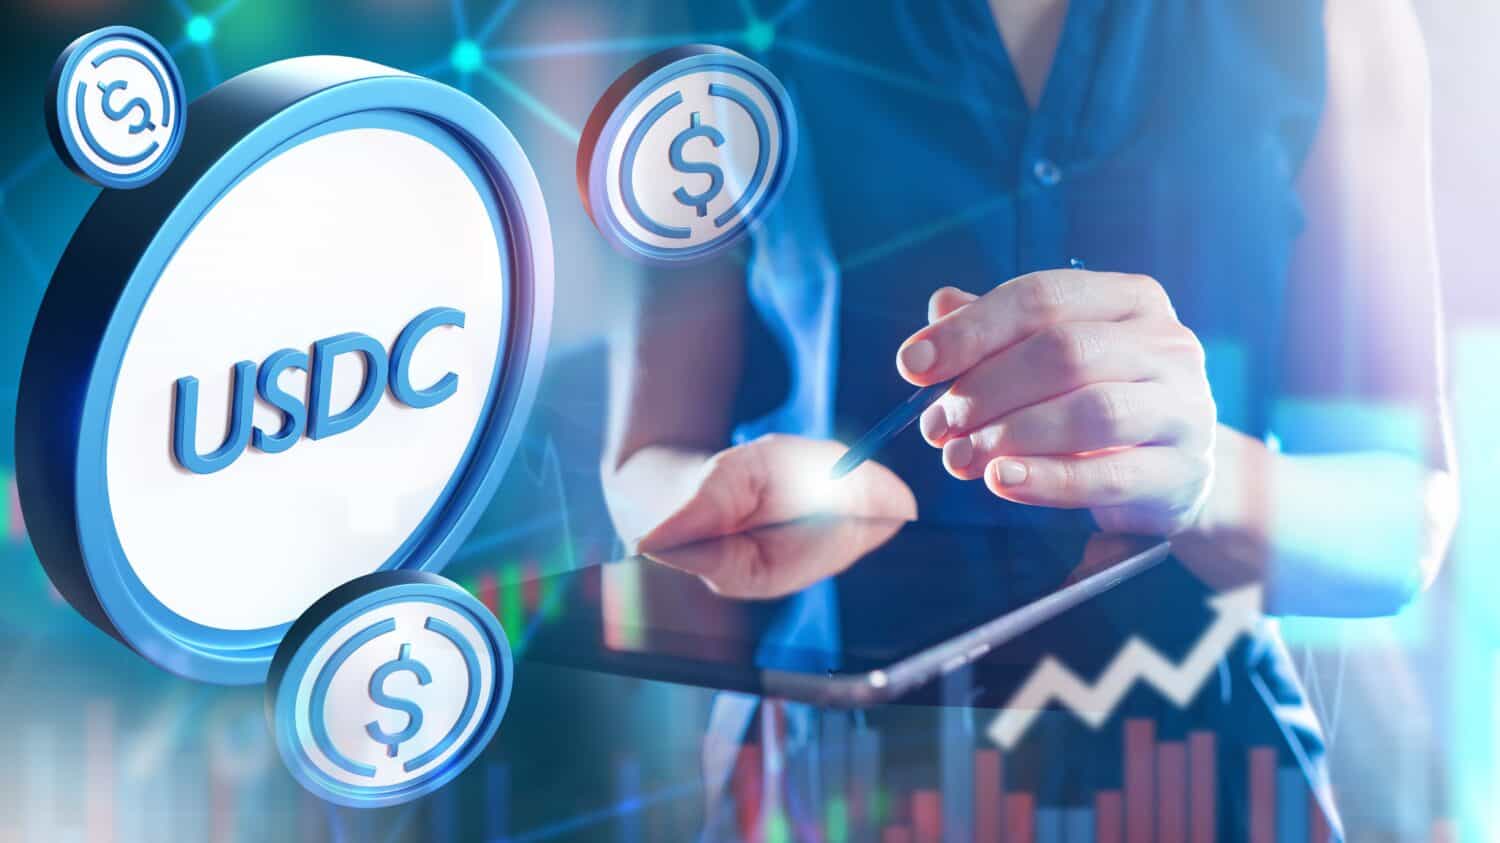 USDc coin. Hands of cryptocurrency trader. Woman with tablet. Investing in USDc. Trading with digital dollar. Blockchain stablecoin. USDc exchange rate. Digital money. USD coin. Online payments